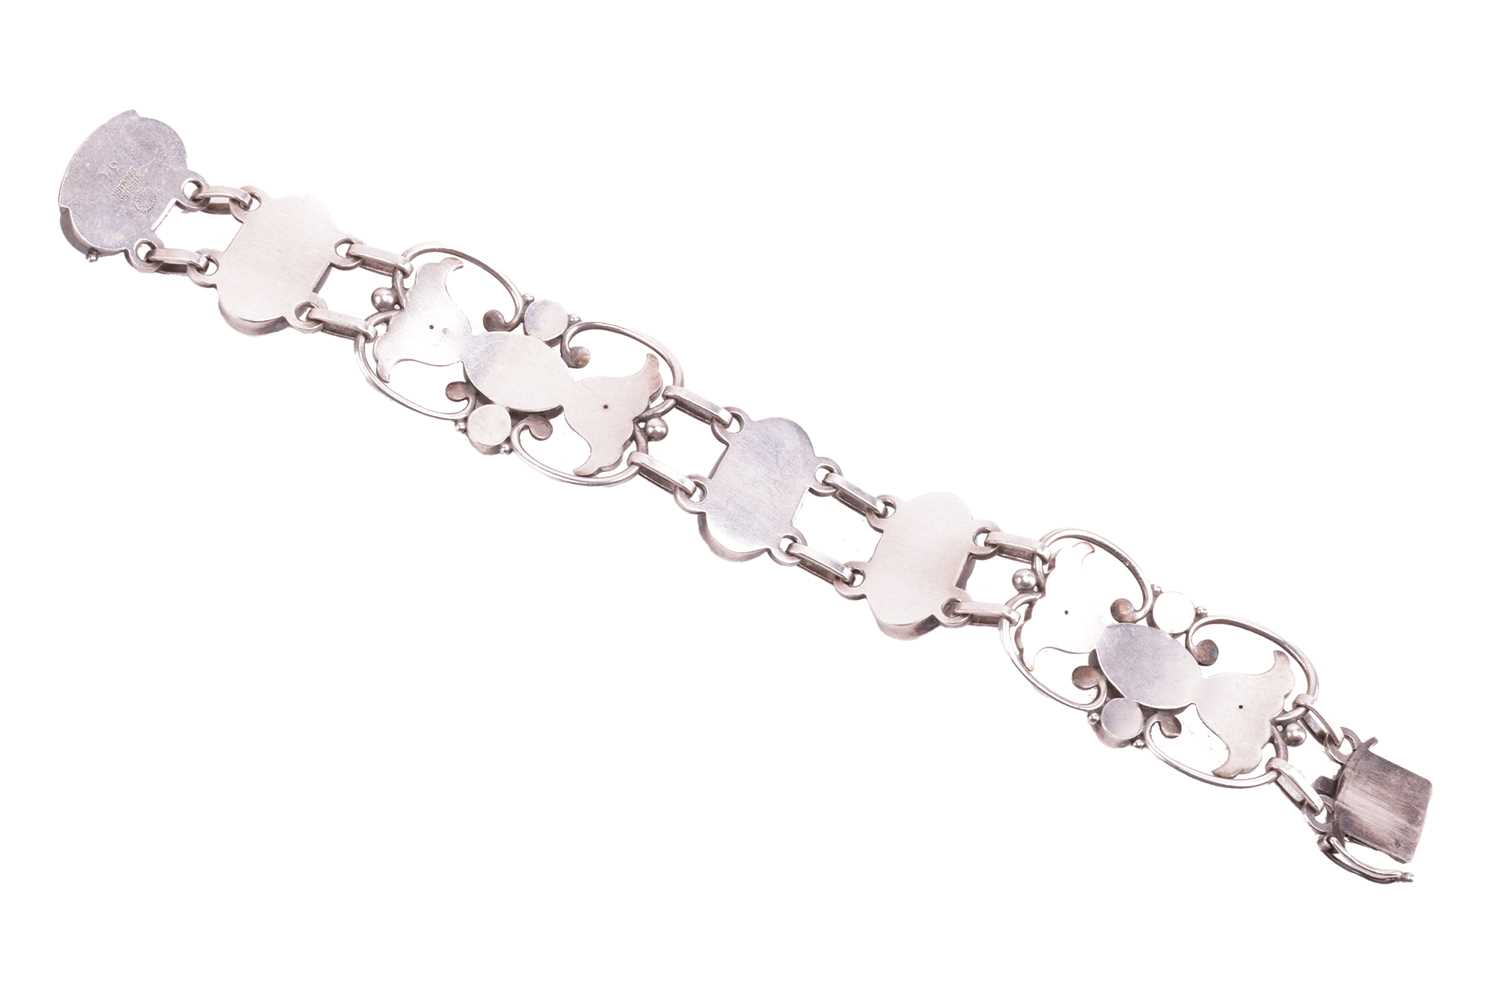 Georg Jensen - a floral link bracelet with bead details, openwork links chased and embossed with tex - Image 2 of 4